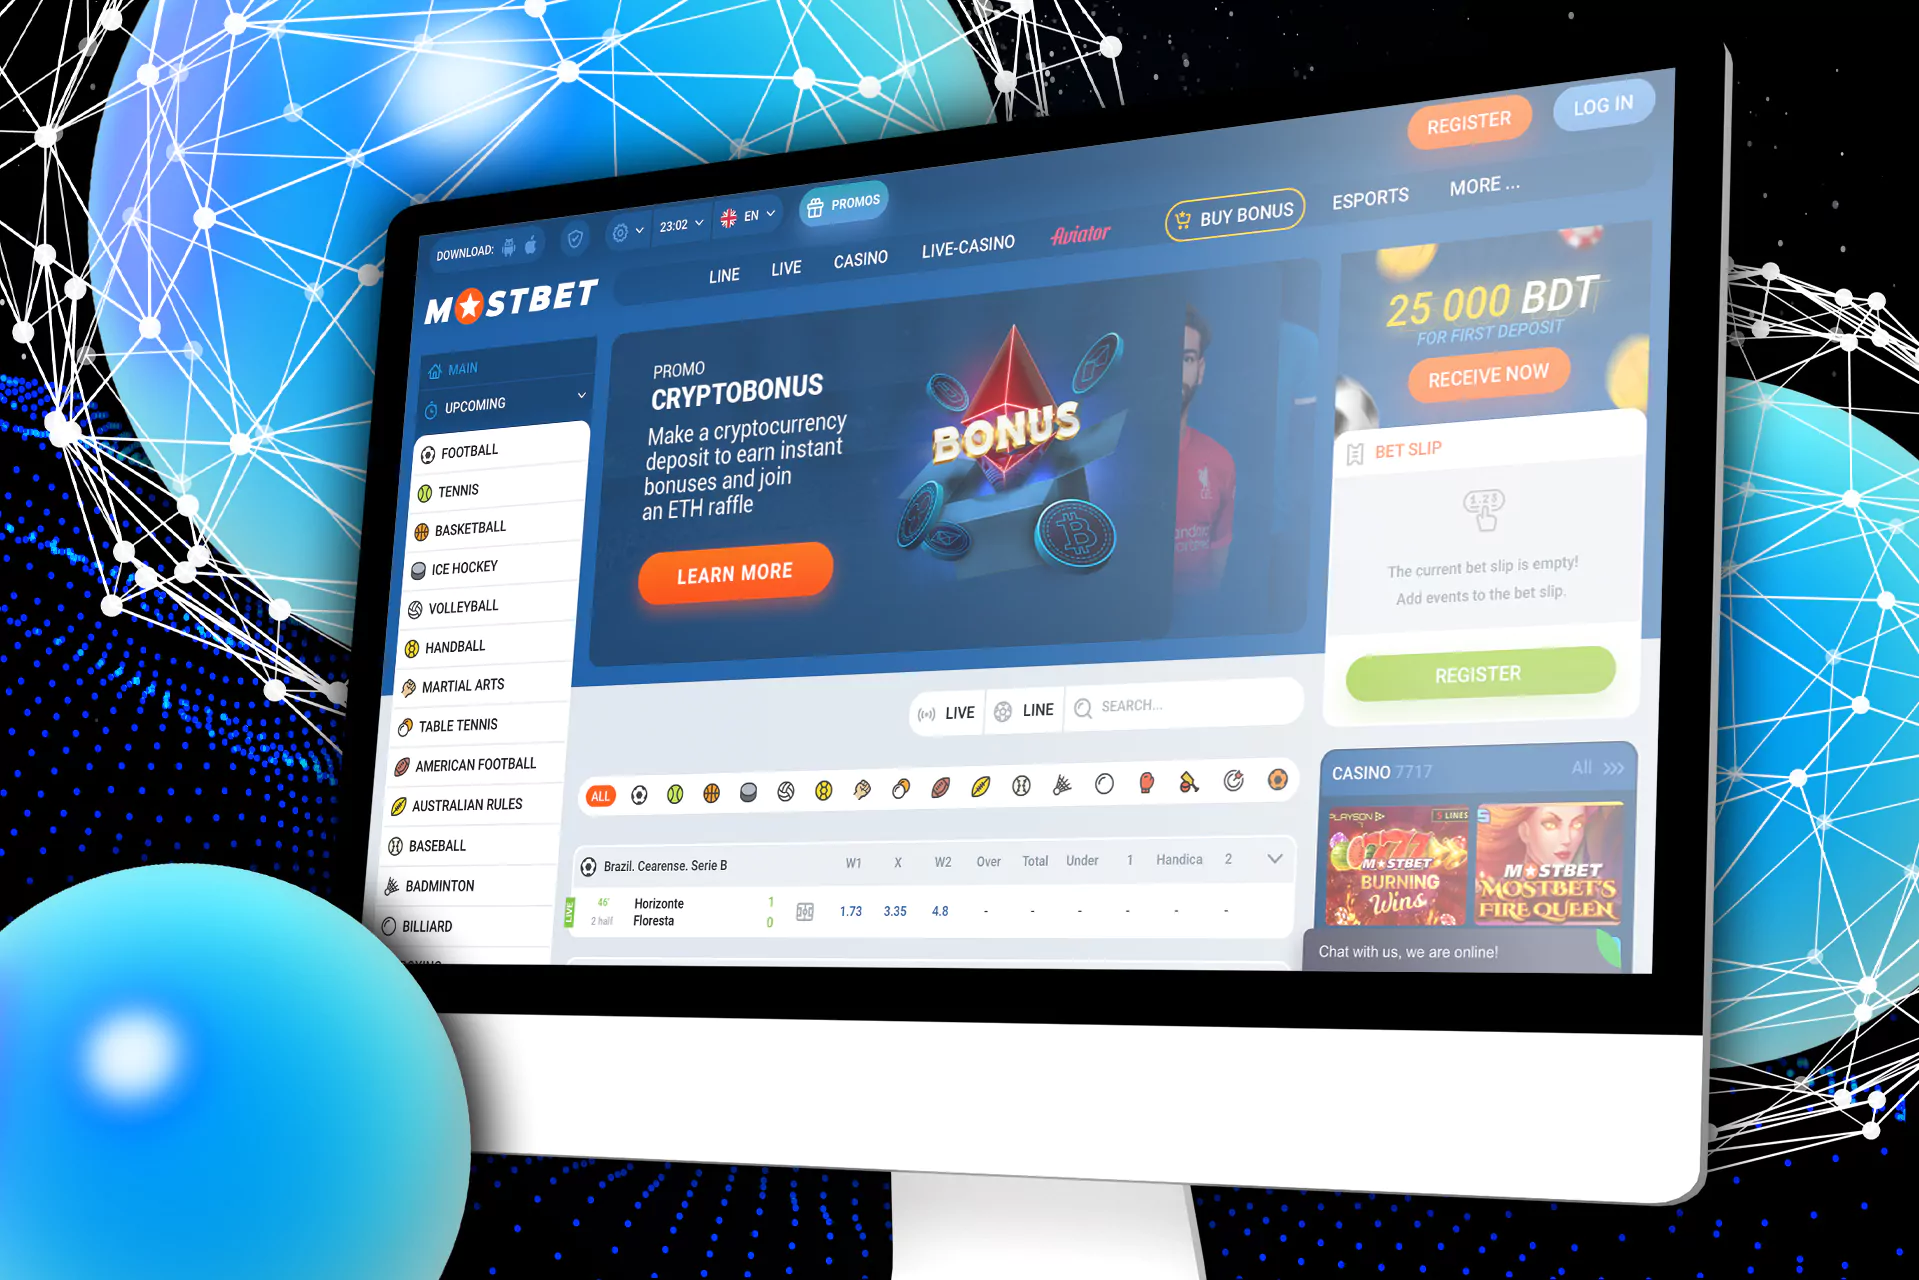 Mostbet website version for personal computer.